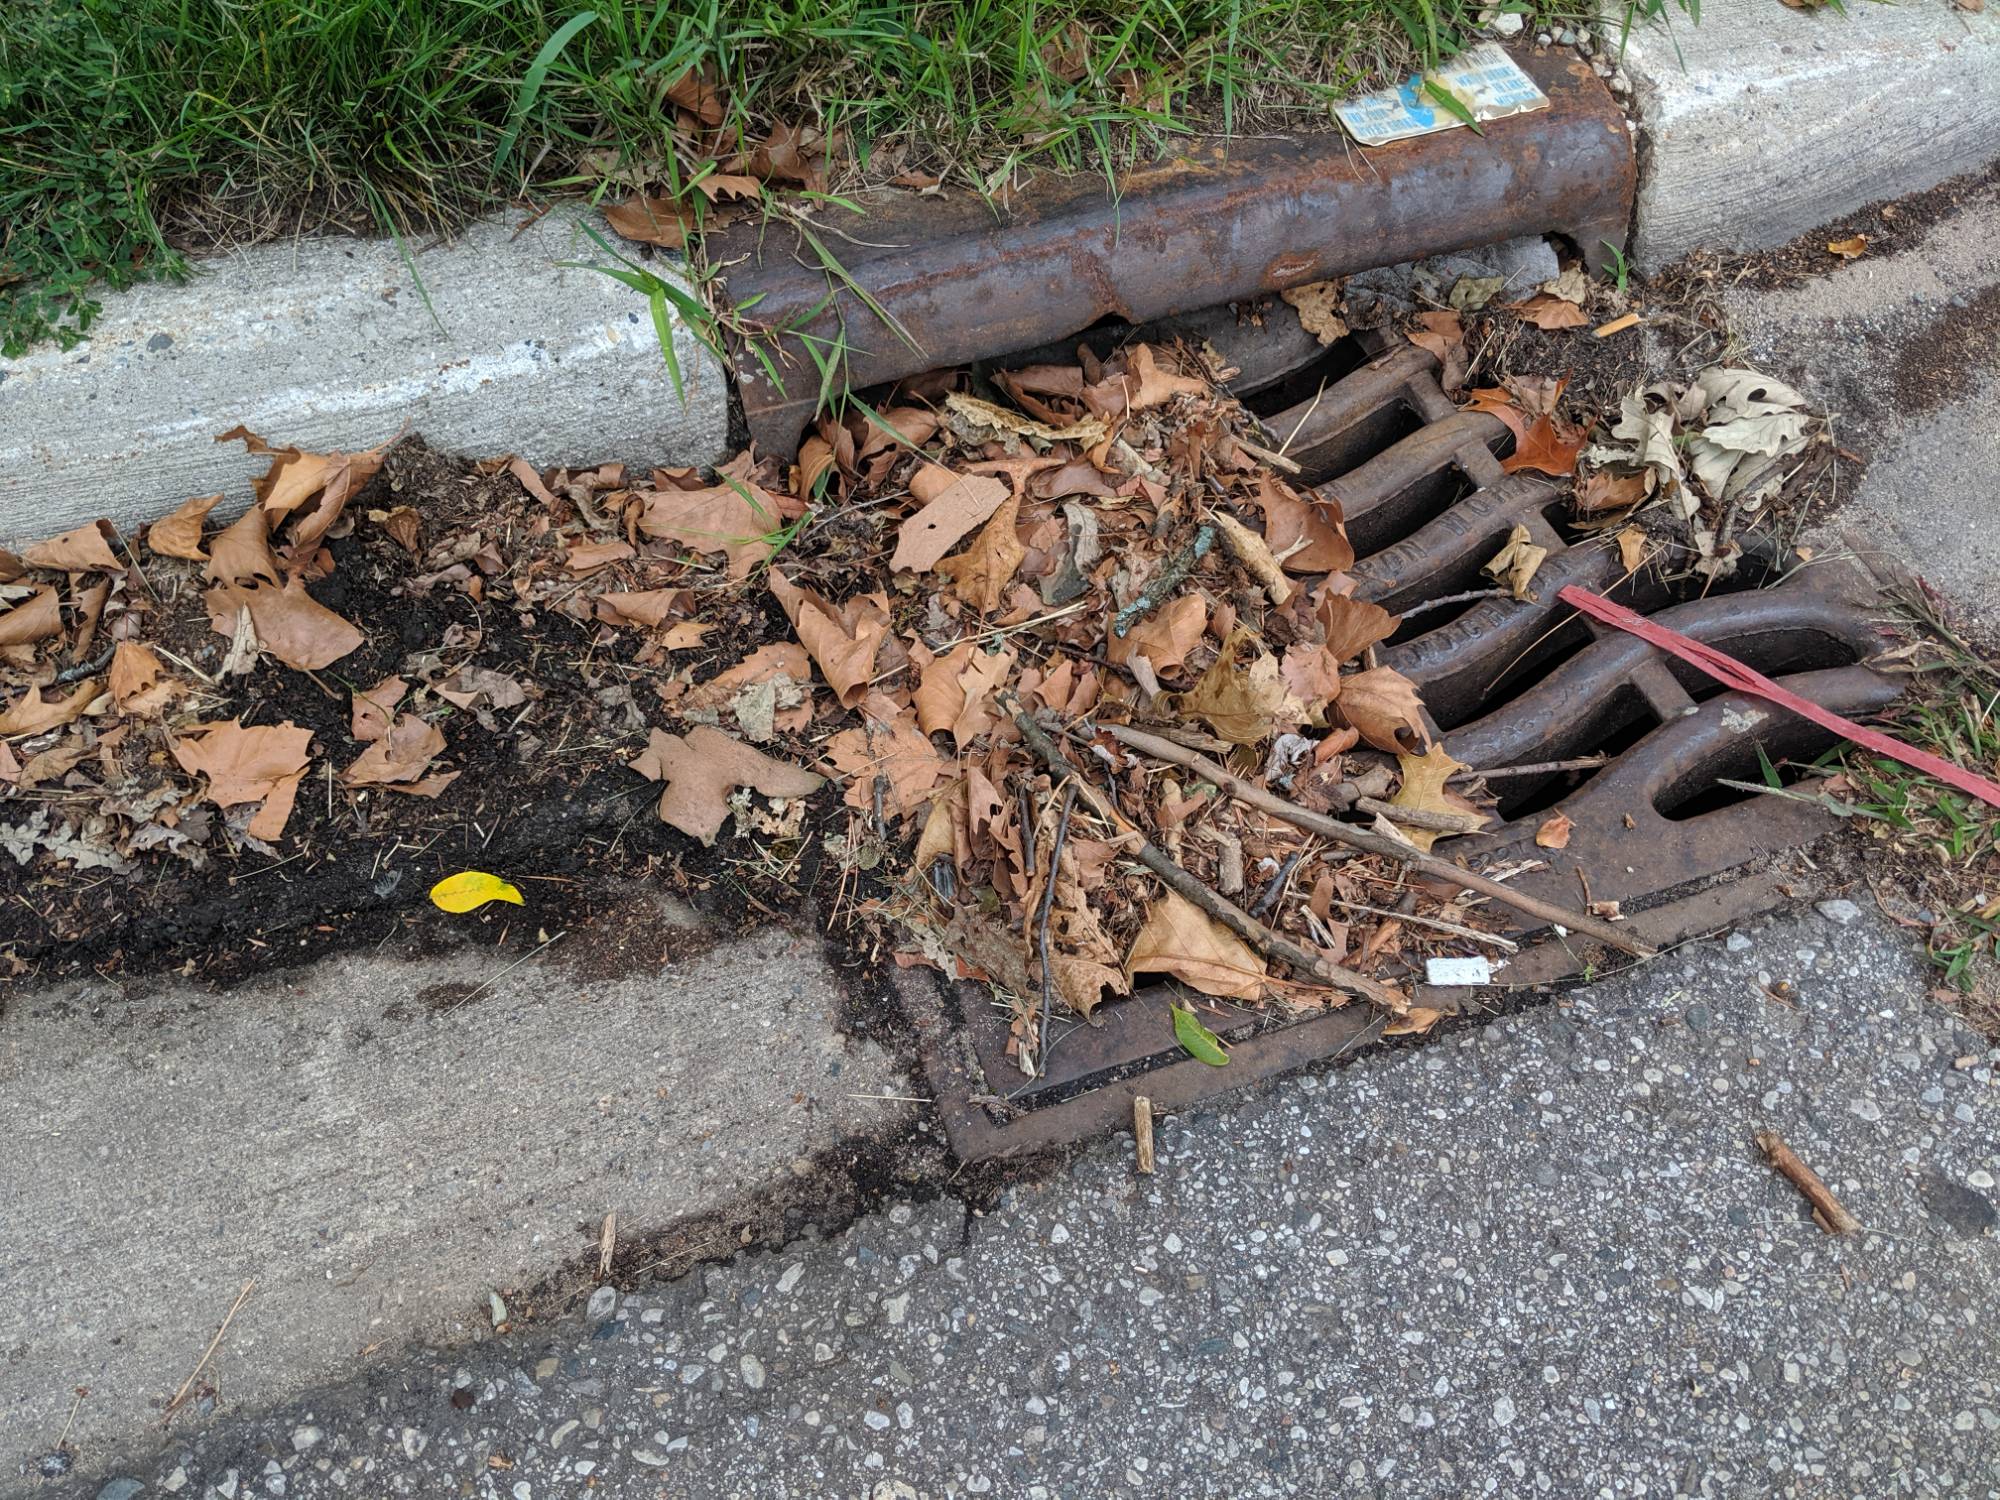 Storm drain clogged with trash and debris